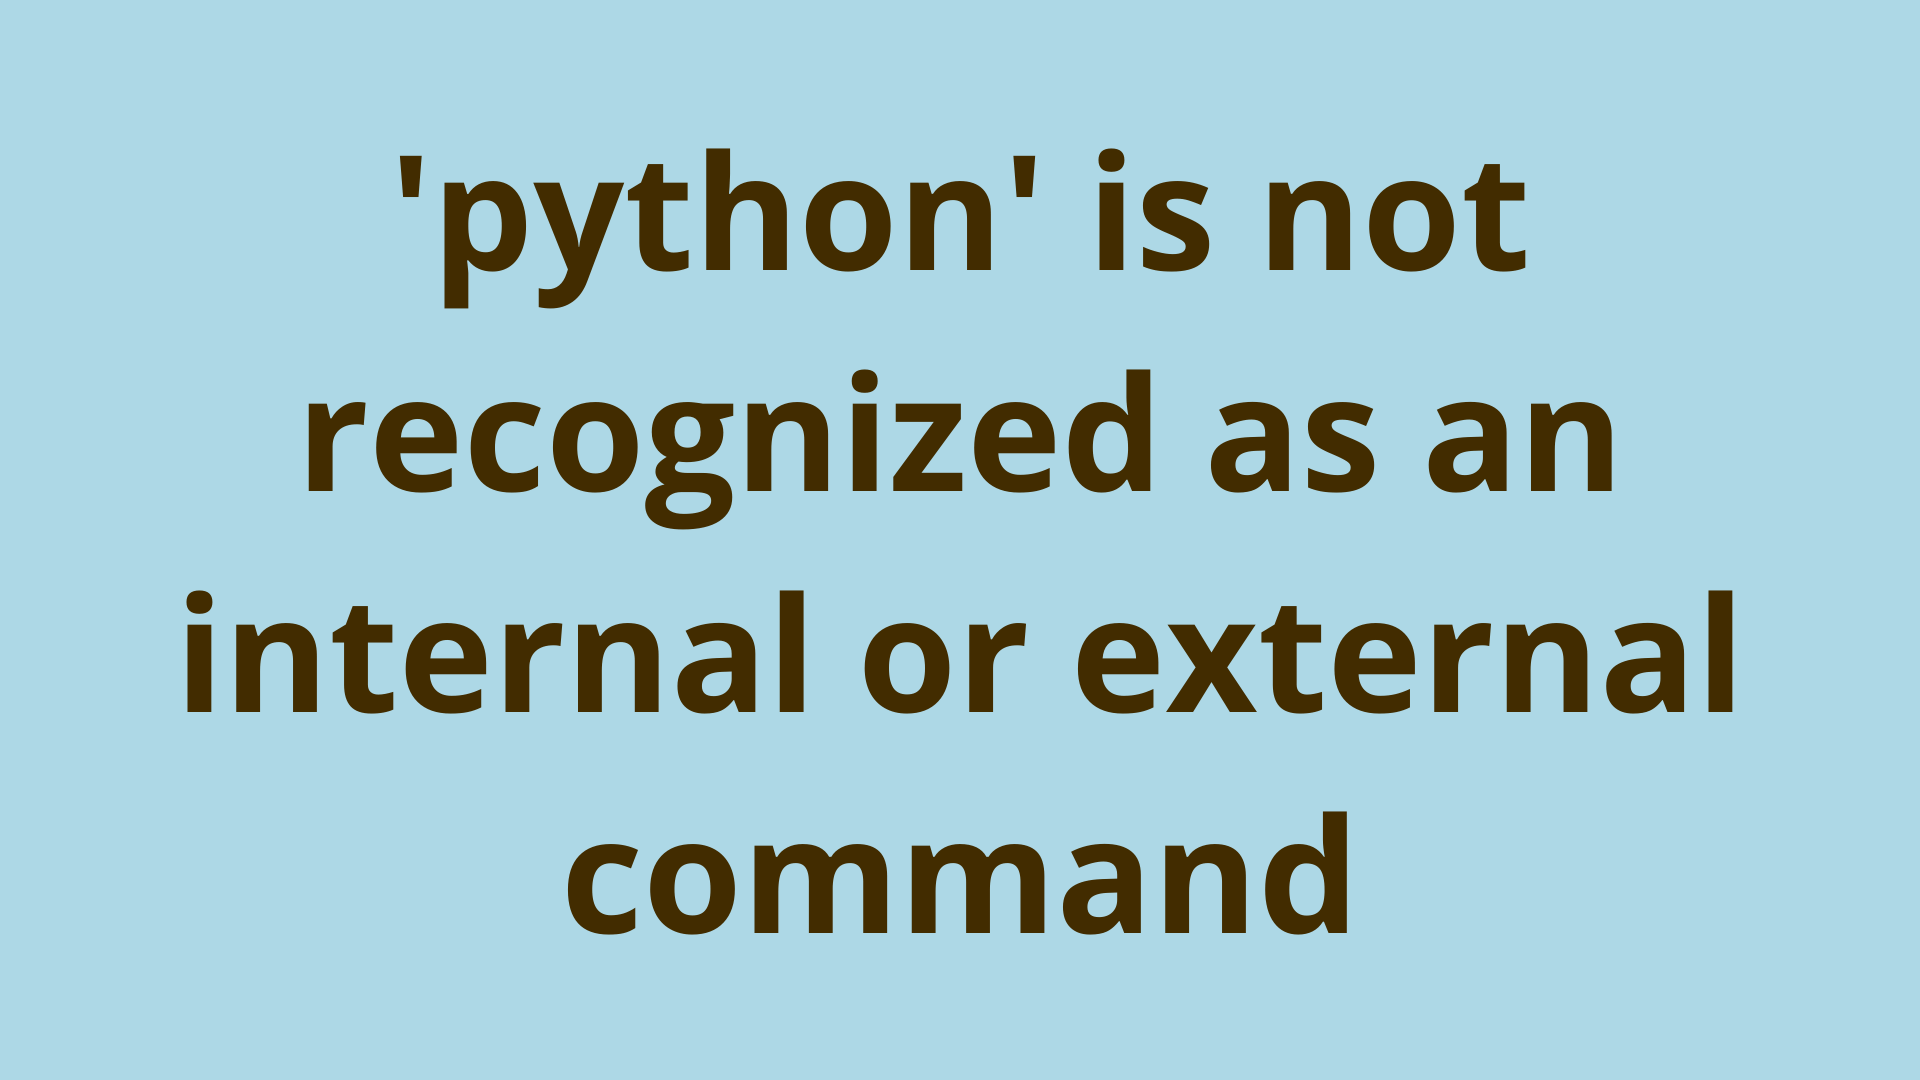 Image of Python is not recognized as an internal or external command